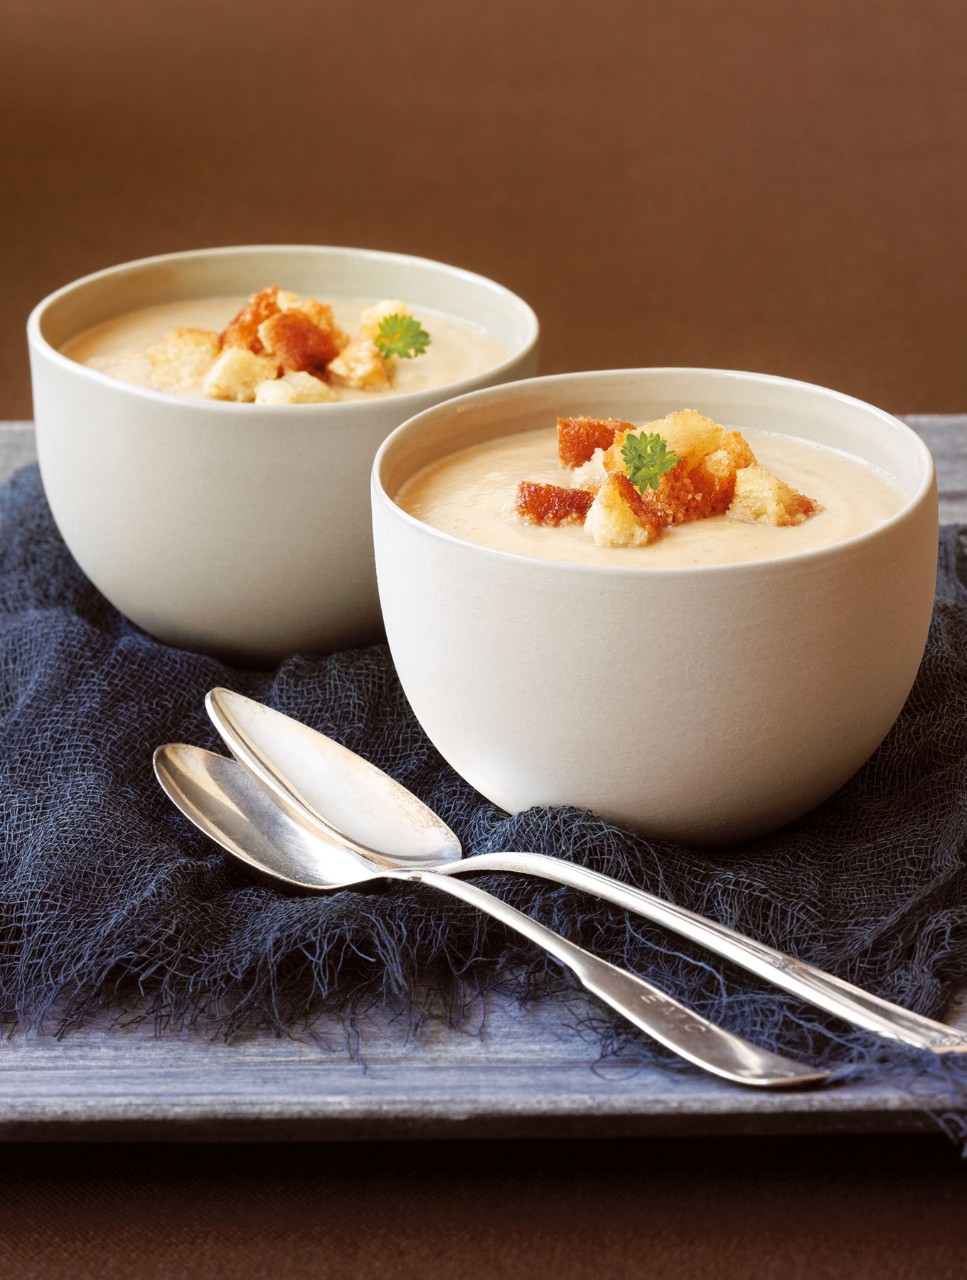 Celery Root and Cèpe Soup